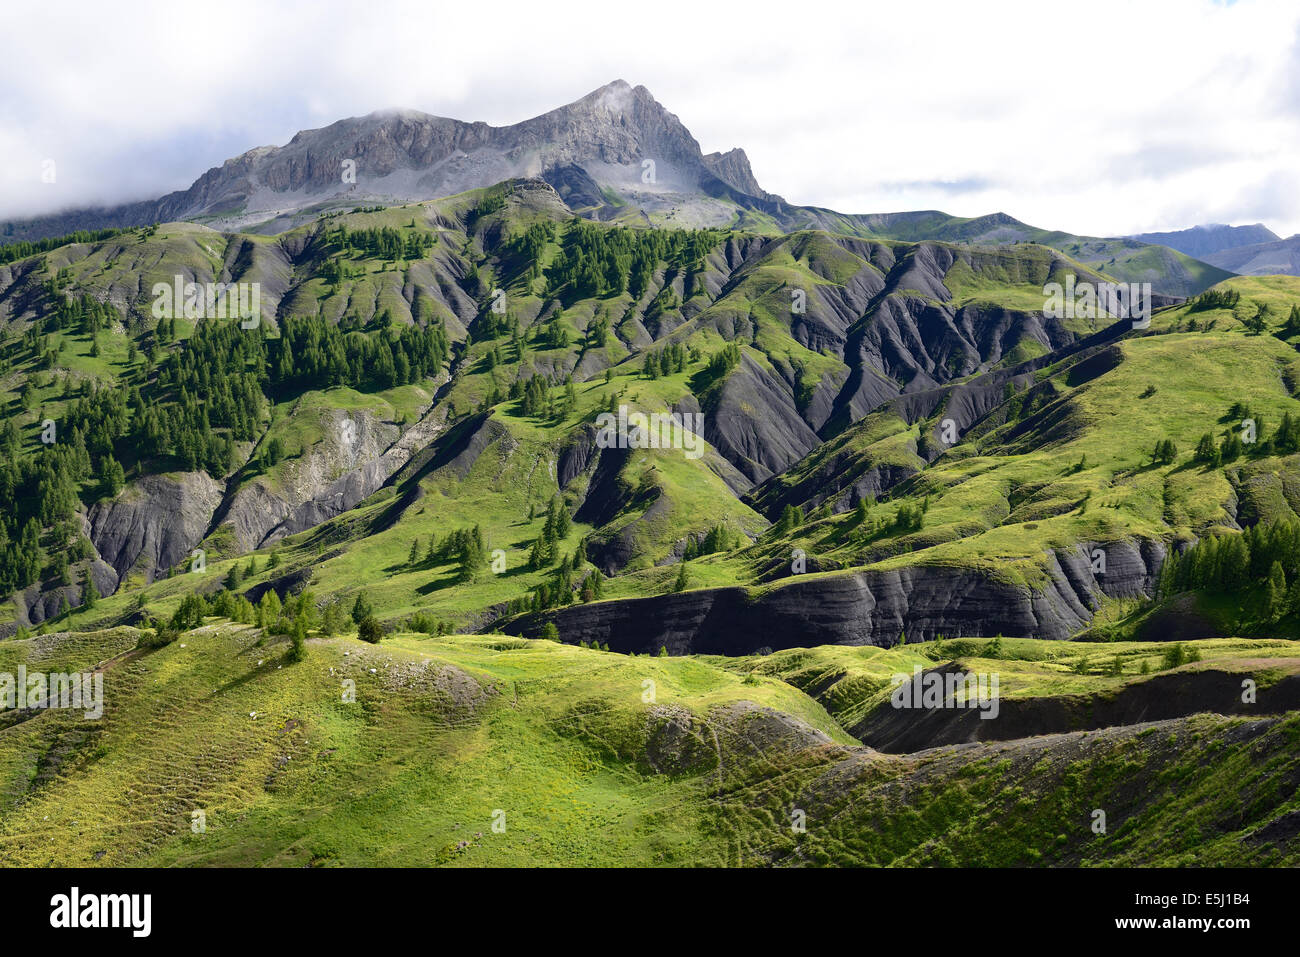 Landscape of a grassy hillside with dark ravines in the Mercantour National Park. Col des Champs, Alpes-de-Haute-Provence and Alpes-Maritimes, France. Stock Photo